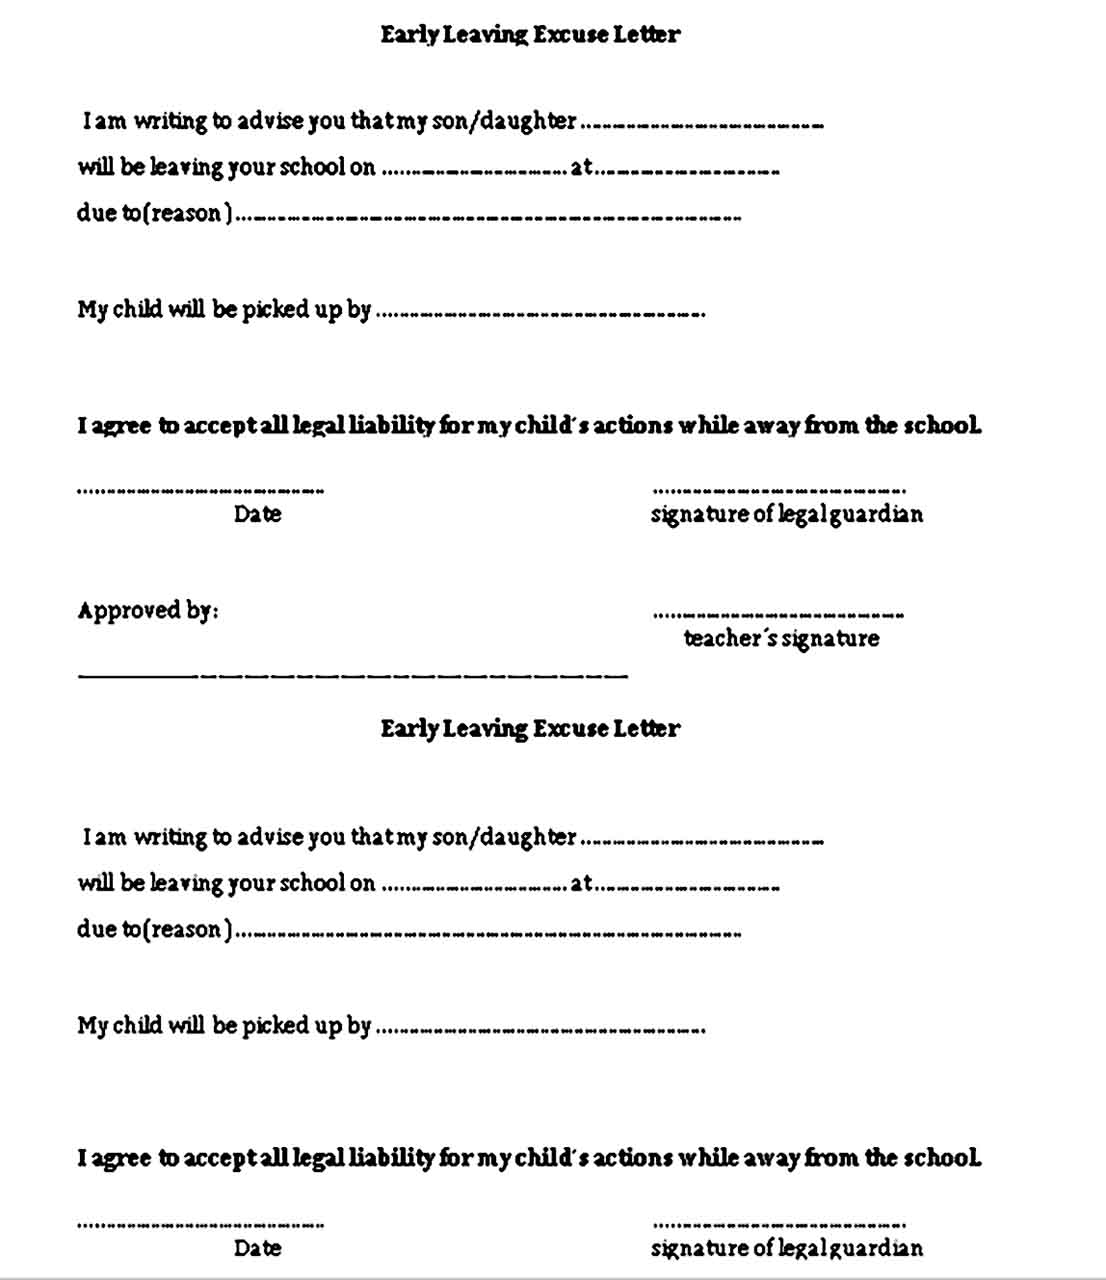 Excuse Letter for Early leaving template